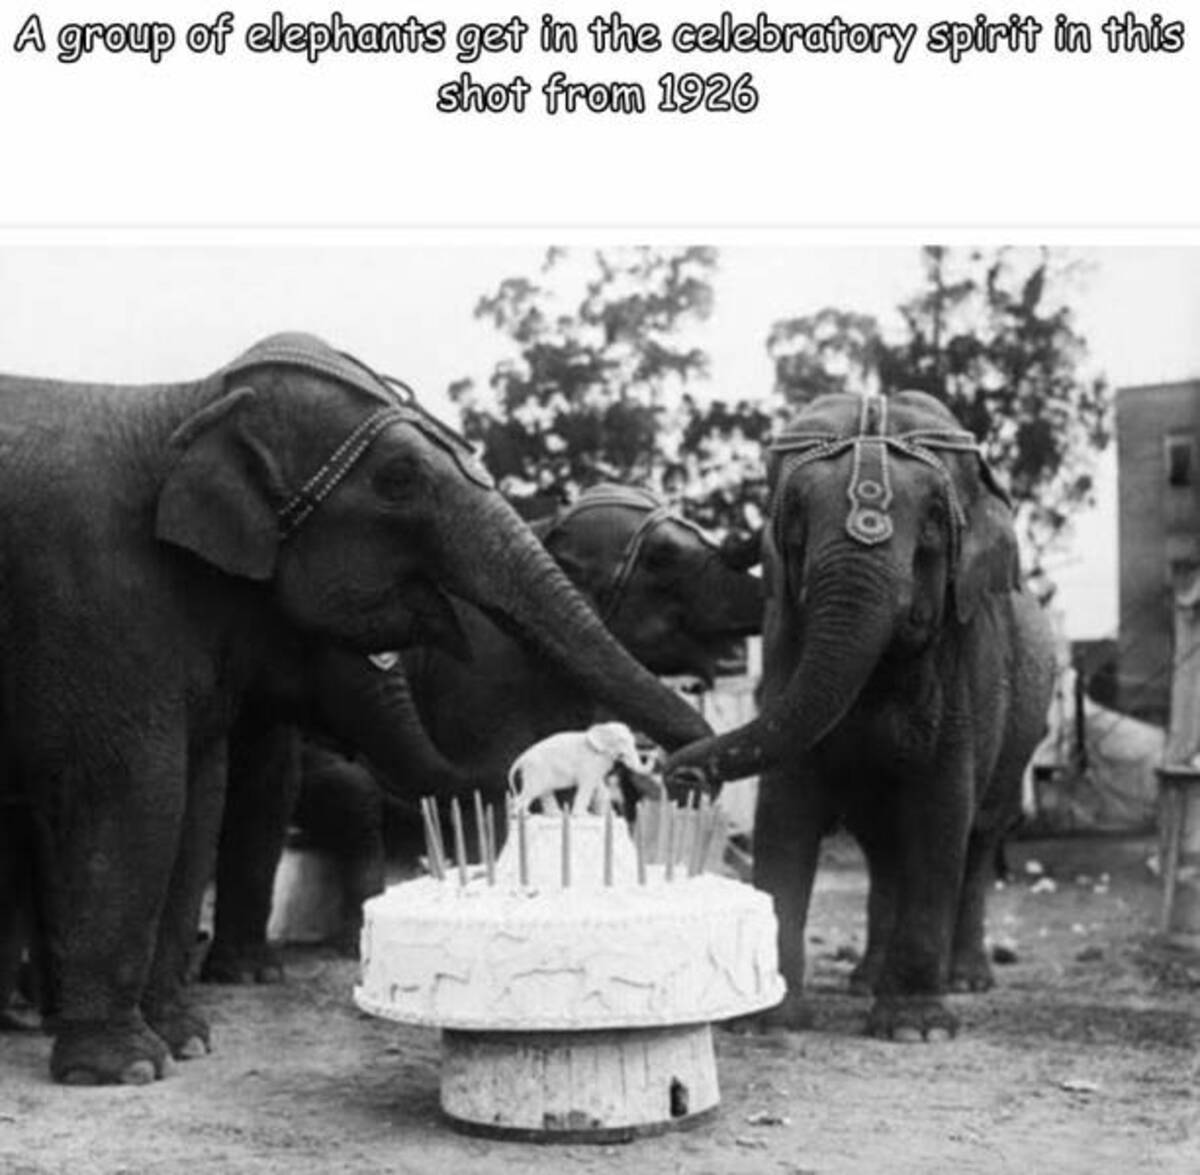 celebrating elephant - A group of elephants get in the celebratory spirit in this shot from 1926